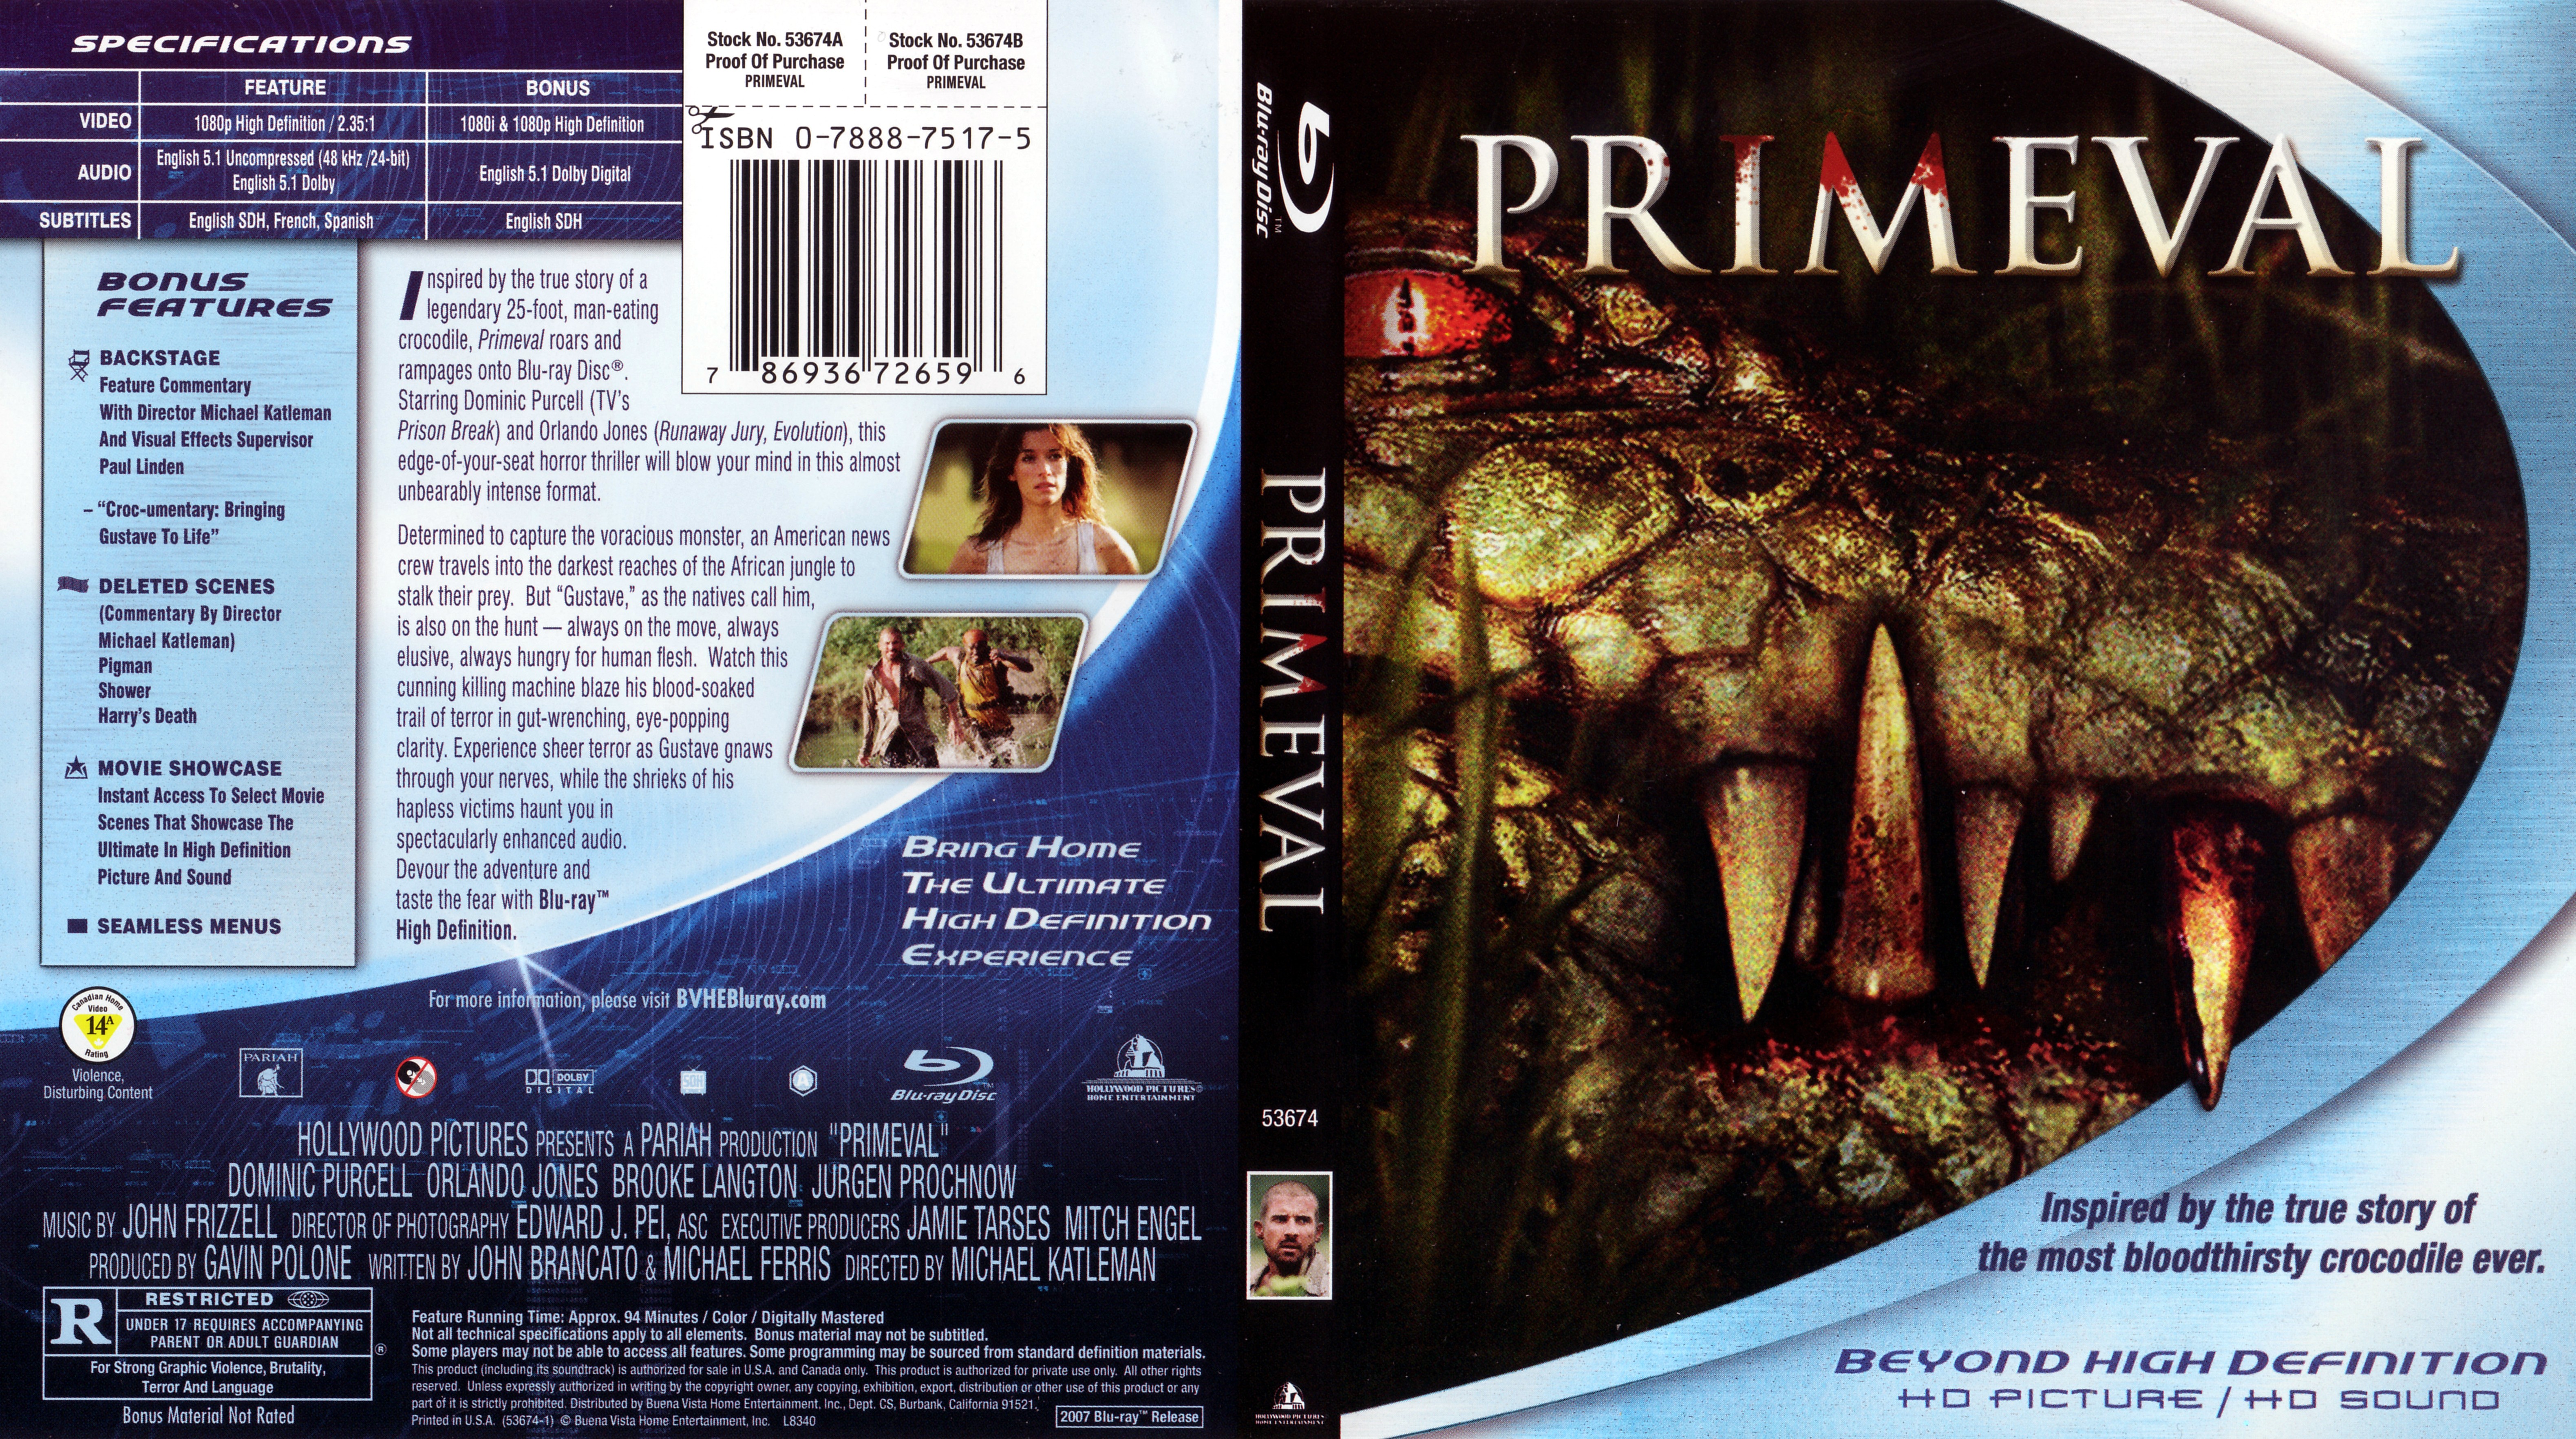 Jaquette DVD Primeval (Canadienne) (BLU-RAY)